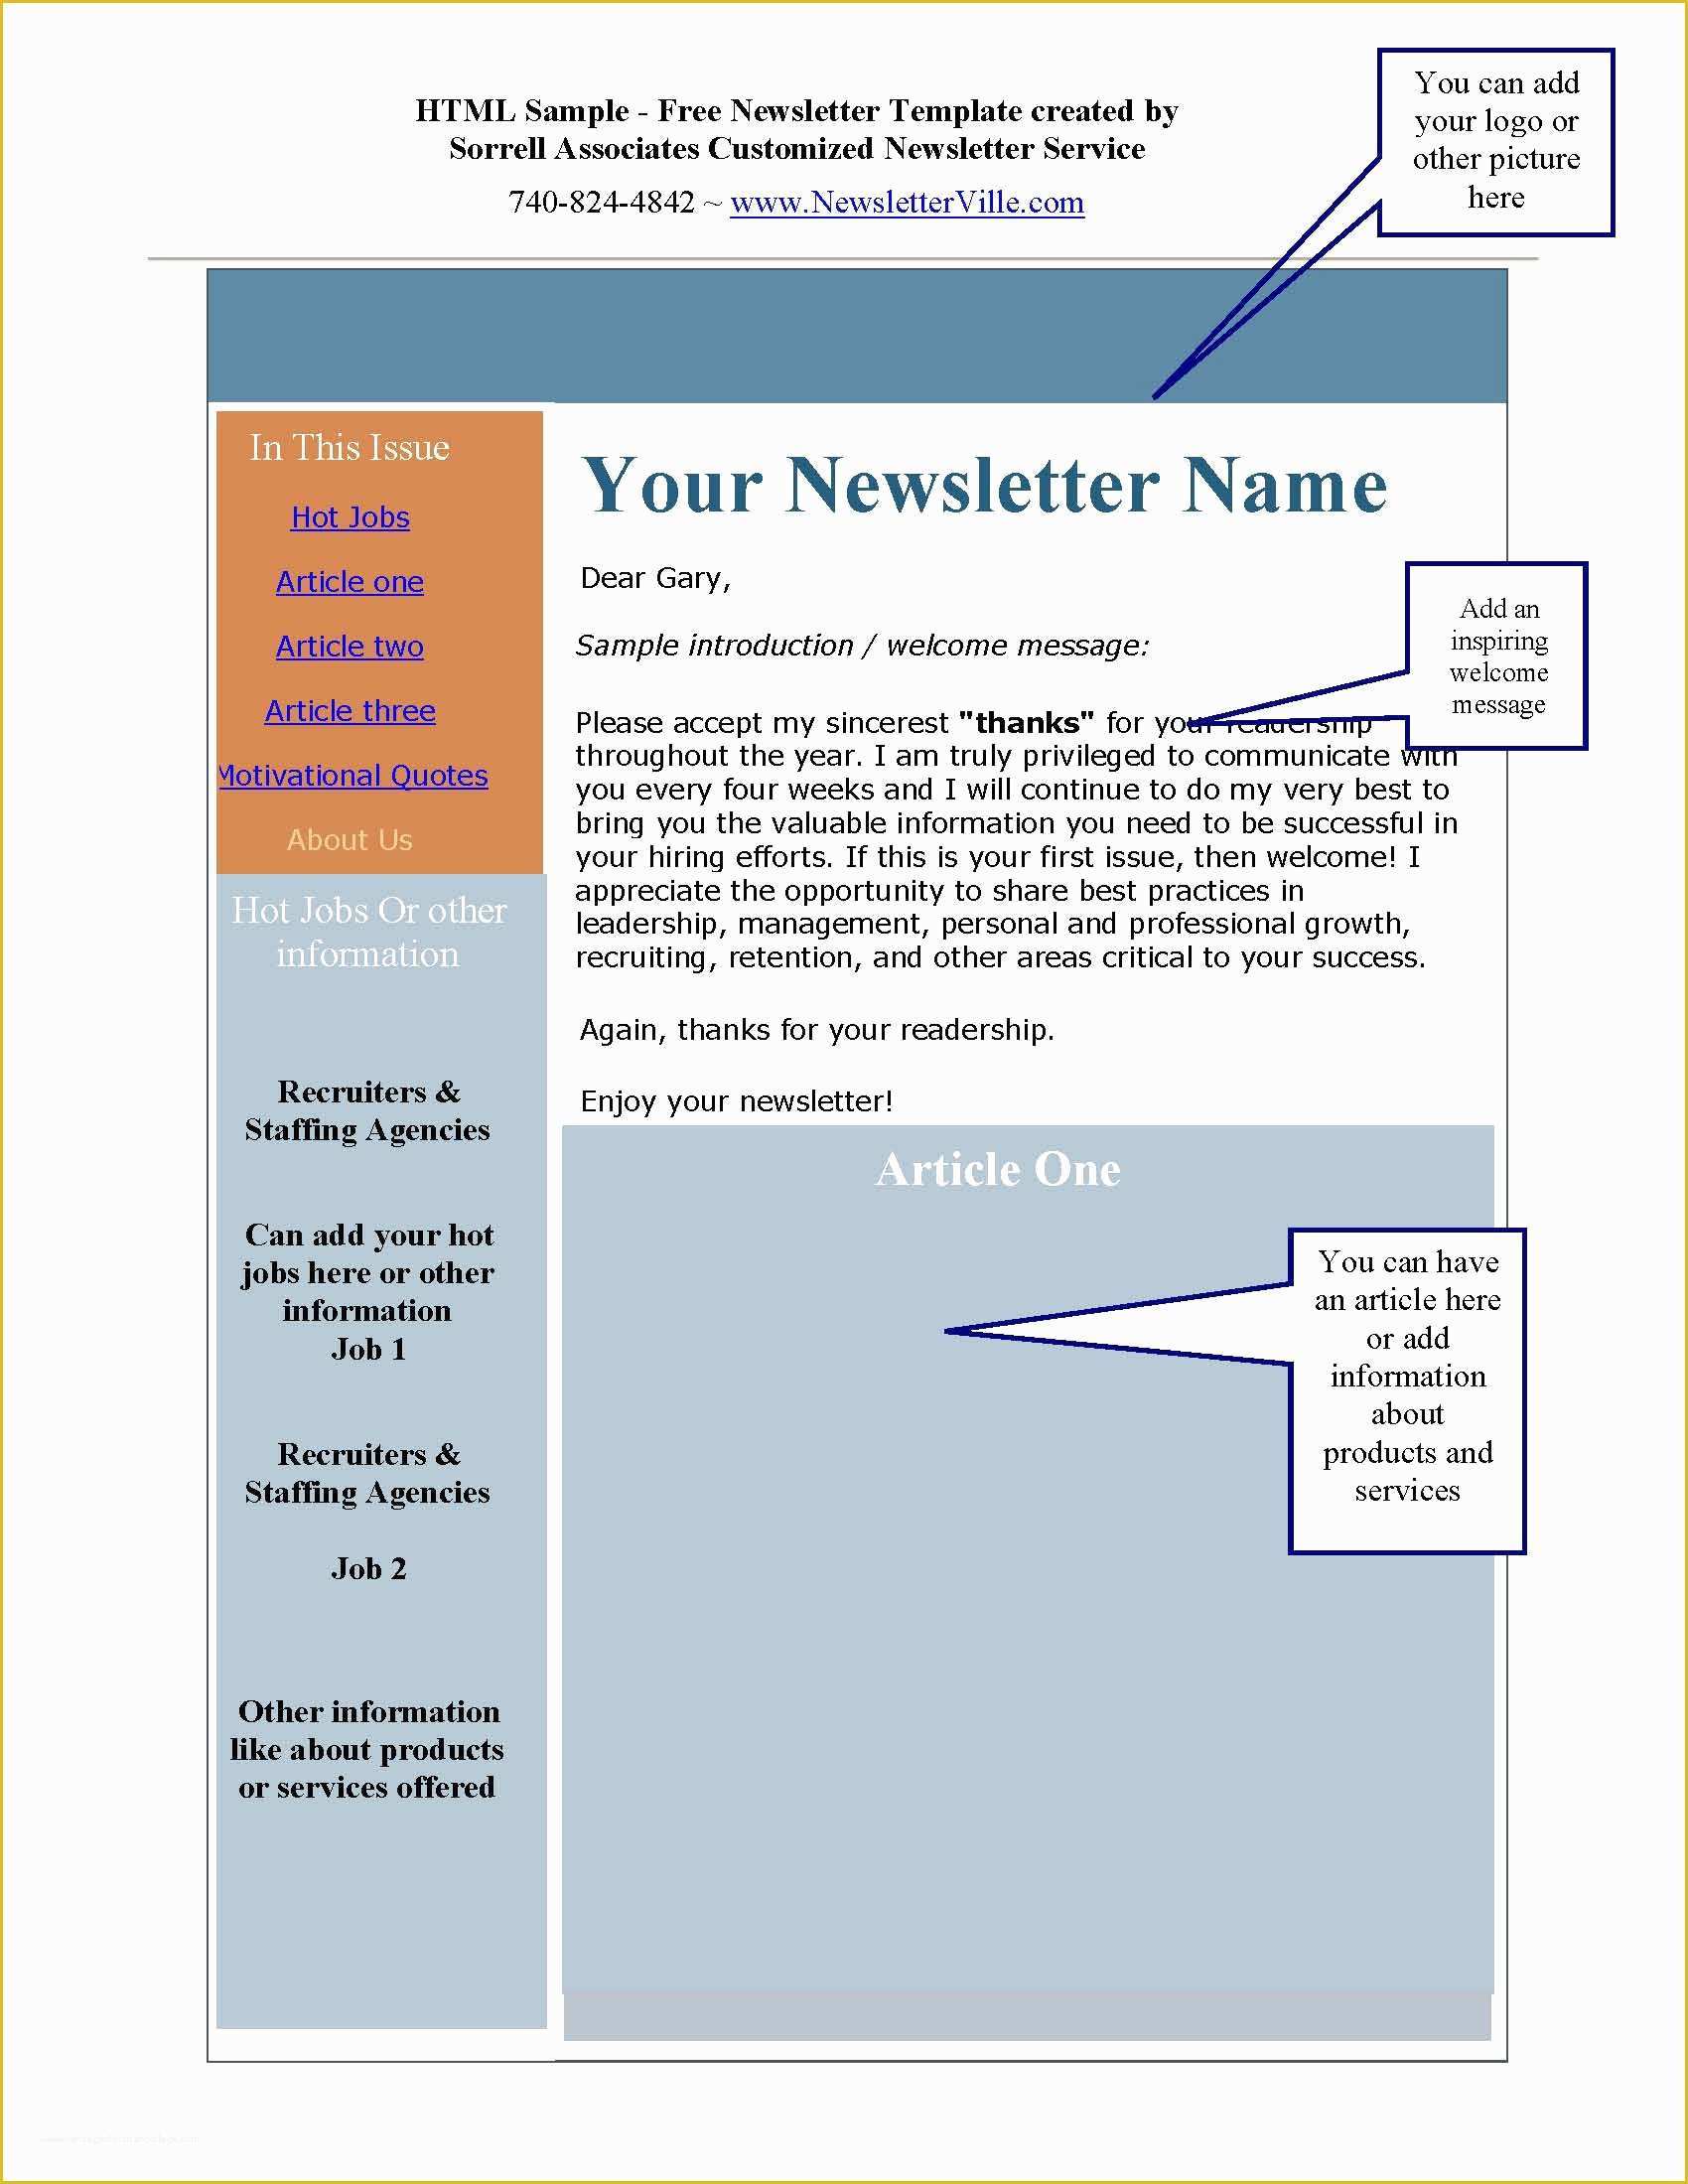 Free Newsletter formats Templates Of Newsletter & Blog Articles Provided Plus Free Newsletter